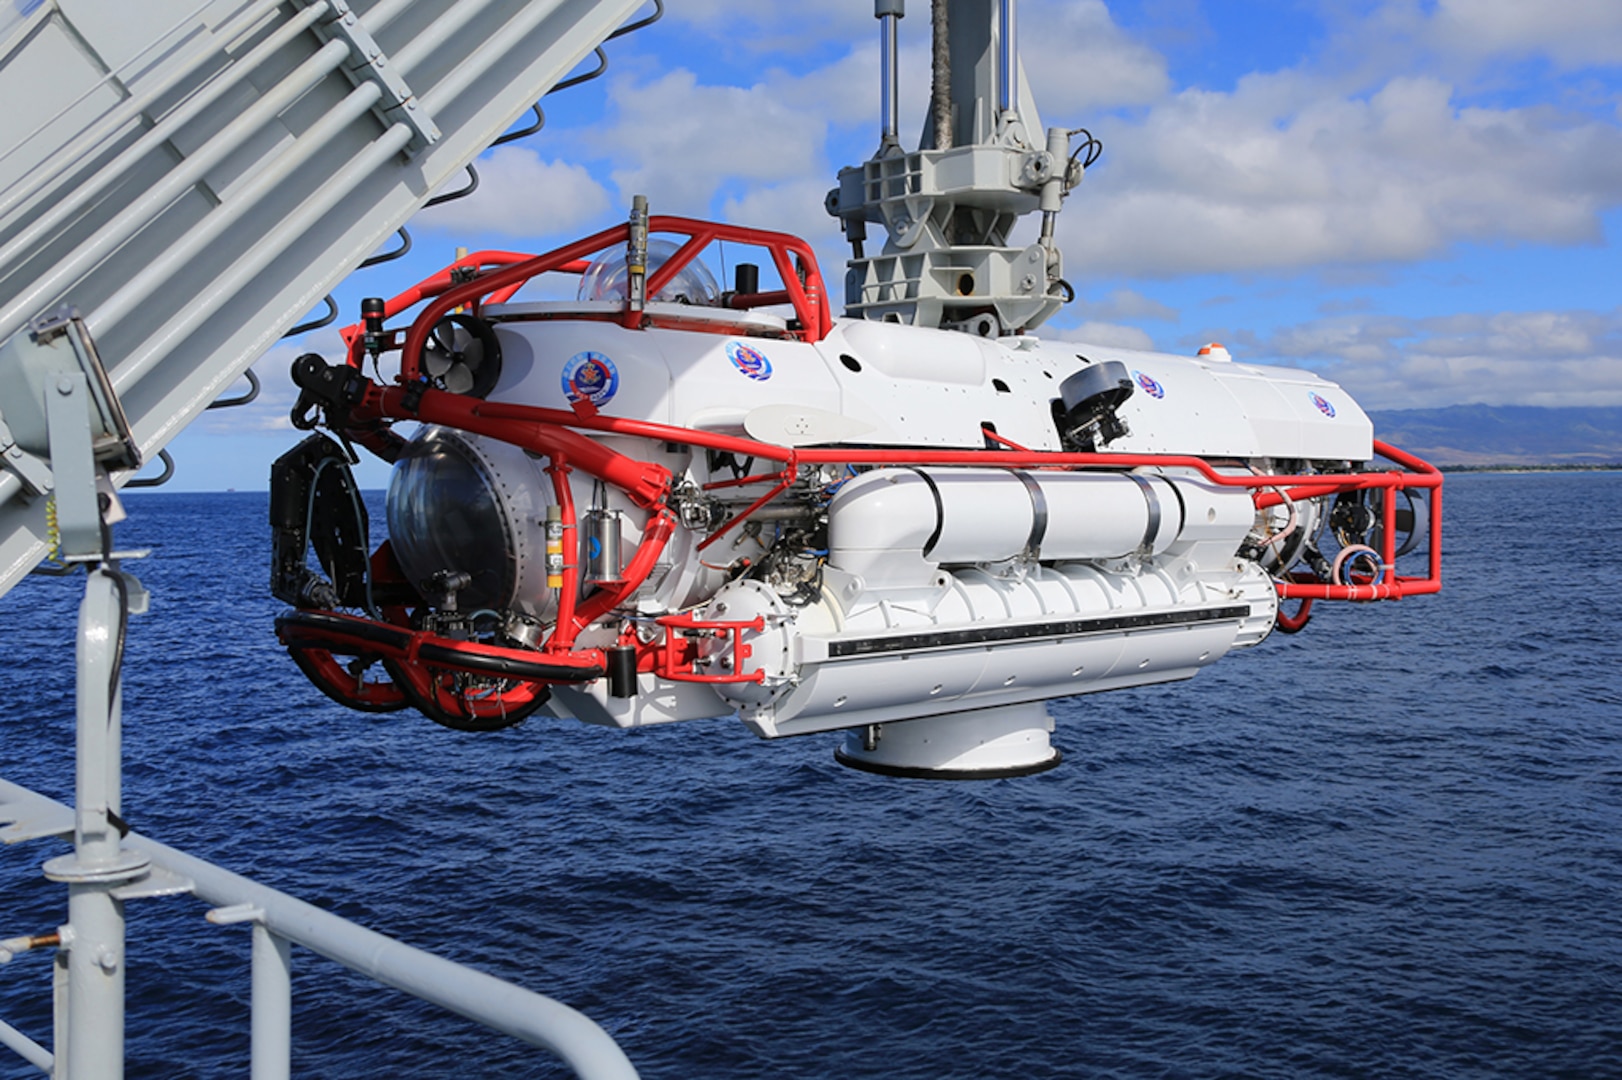 PACIFIC OCEAN (July 13, 2016) Sailors from the Chinese navy submarine rescue ship Changdao (867) retrieve an LR-7 submersible undersea rescue vehicle off the coast of Hawaii following a successful mating evolution between the LR-7 and a U.S. faux-NATO rescue seat laid by USNS Safeguard (T-ARS-50), during Rim of the Pacific 2016. The evolution was the final event and practical portion of a multinational submarine rescue exercise between seven countries.  Twenty-six nations, more than 40 ships and submarines, more than 200 aircraft and 25,000 personnel are participating in RIMPAC from June 30 to Aug. 4, in and around the Hawaiian Islands and Southern California. The world's largest international maritime exercise, RIMPAC provides a unique training opportunity that helps participants foster and sustain the cooperative relationships that are critical to ensuring the safety of sea lanes and security on the world's oceans. RIMPAC 2016 is the 25th exercise in the series that began in 1971. 